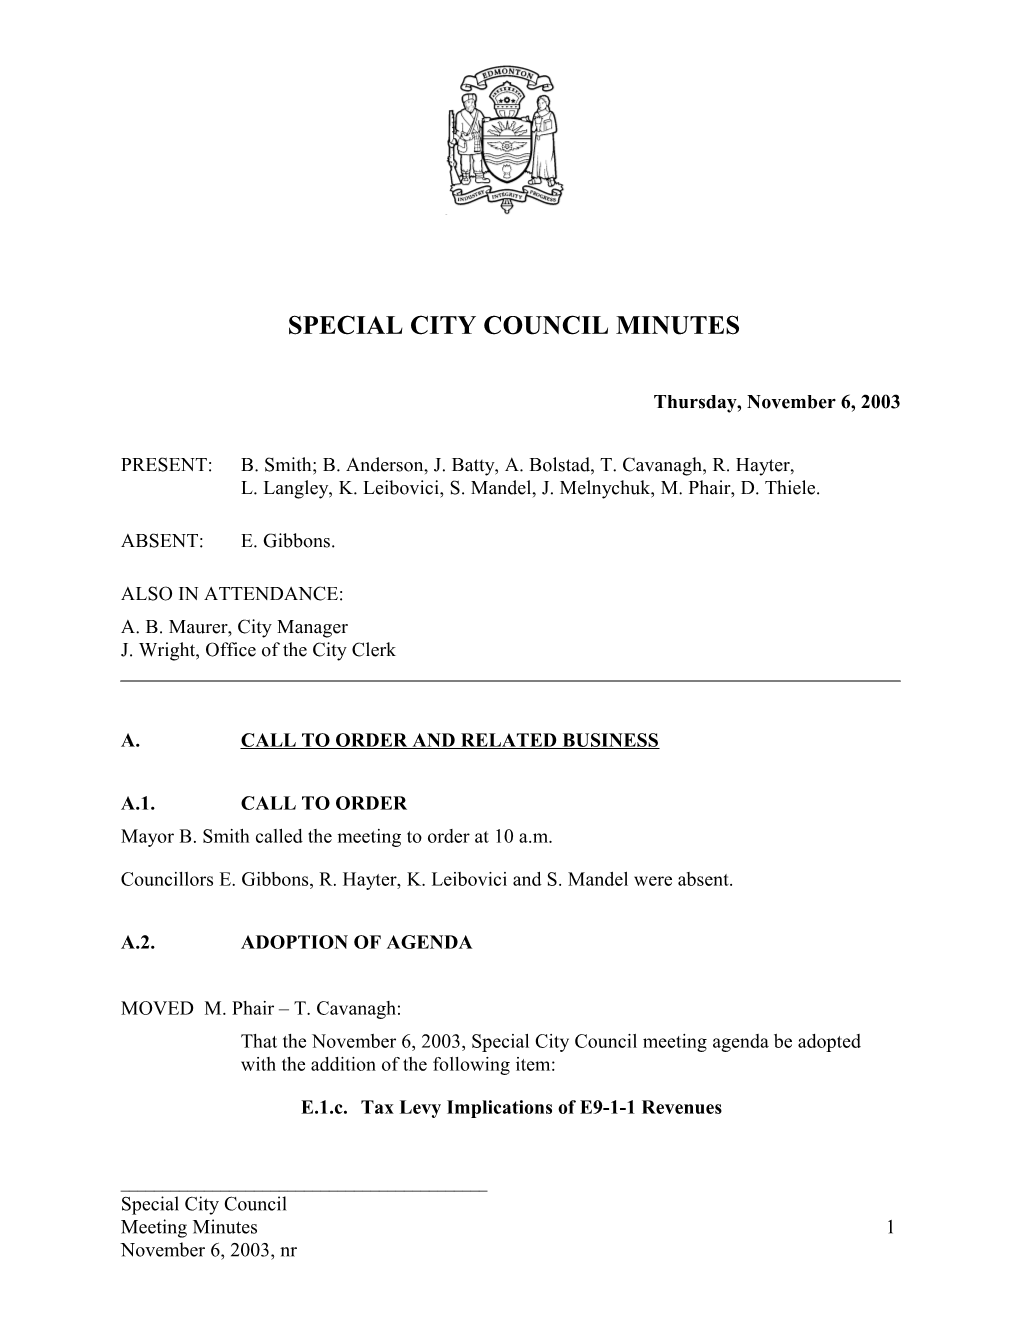 Minutes for City Council November 6, 2003 Meeting